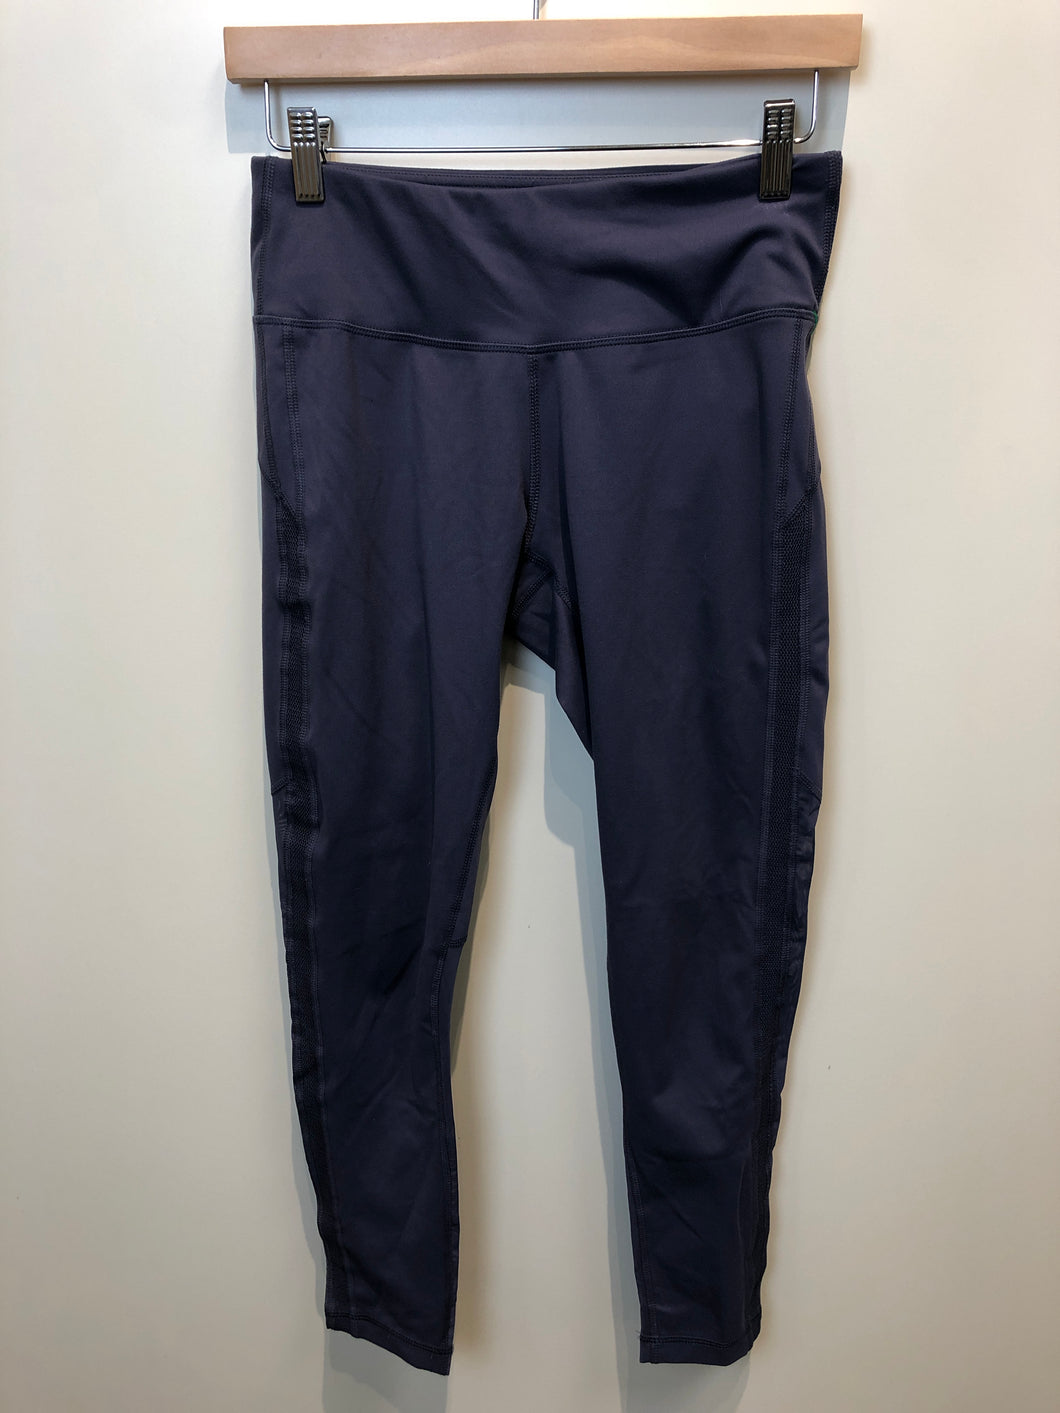 Yogalicious Womens Athletic Pants Size Small